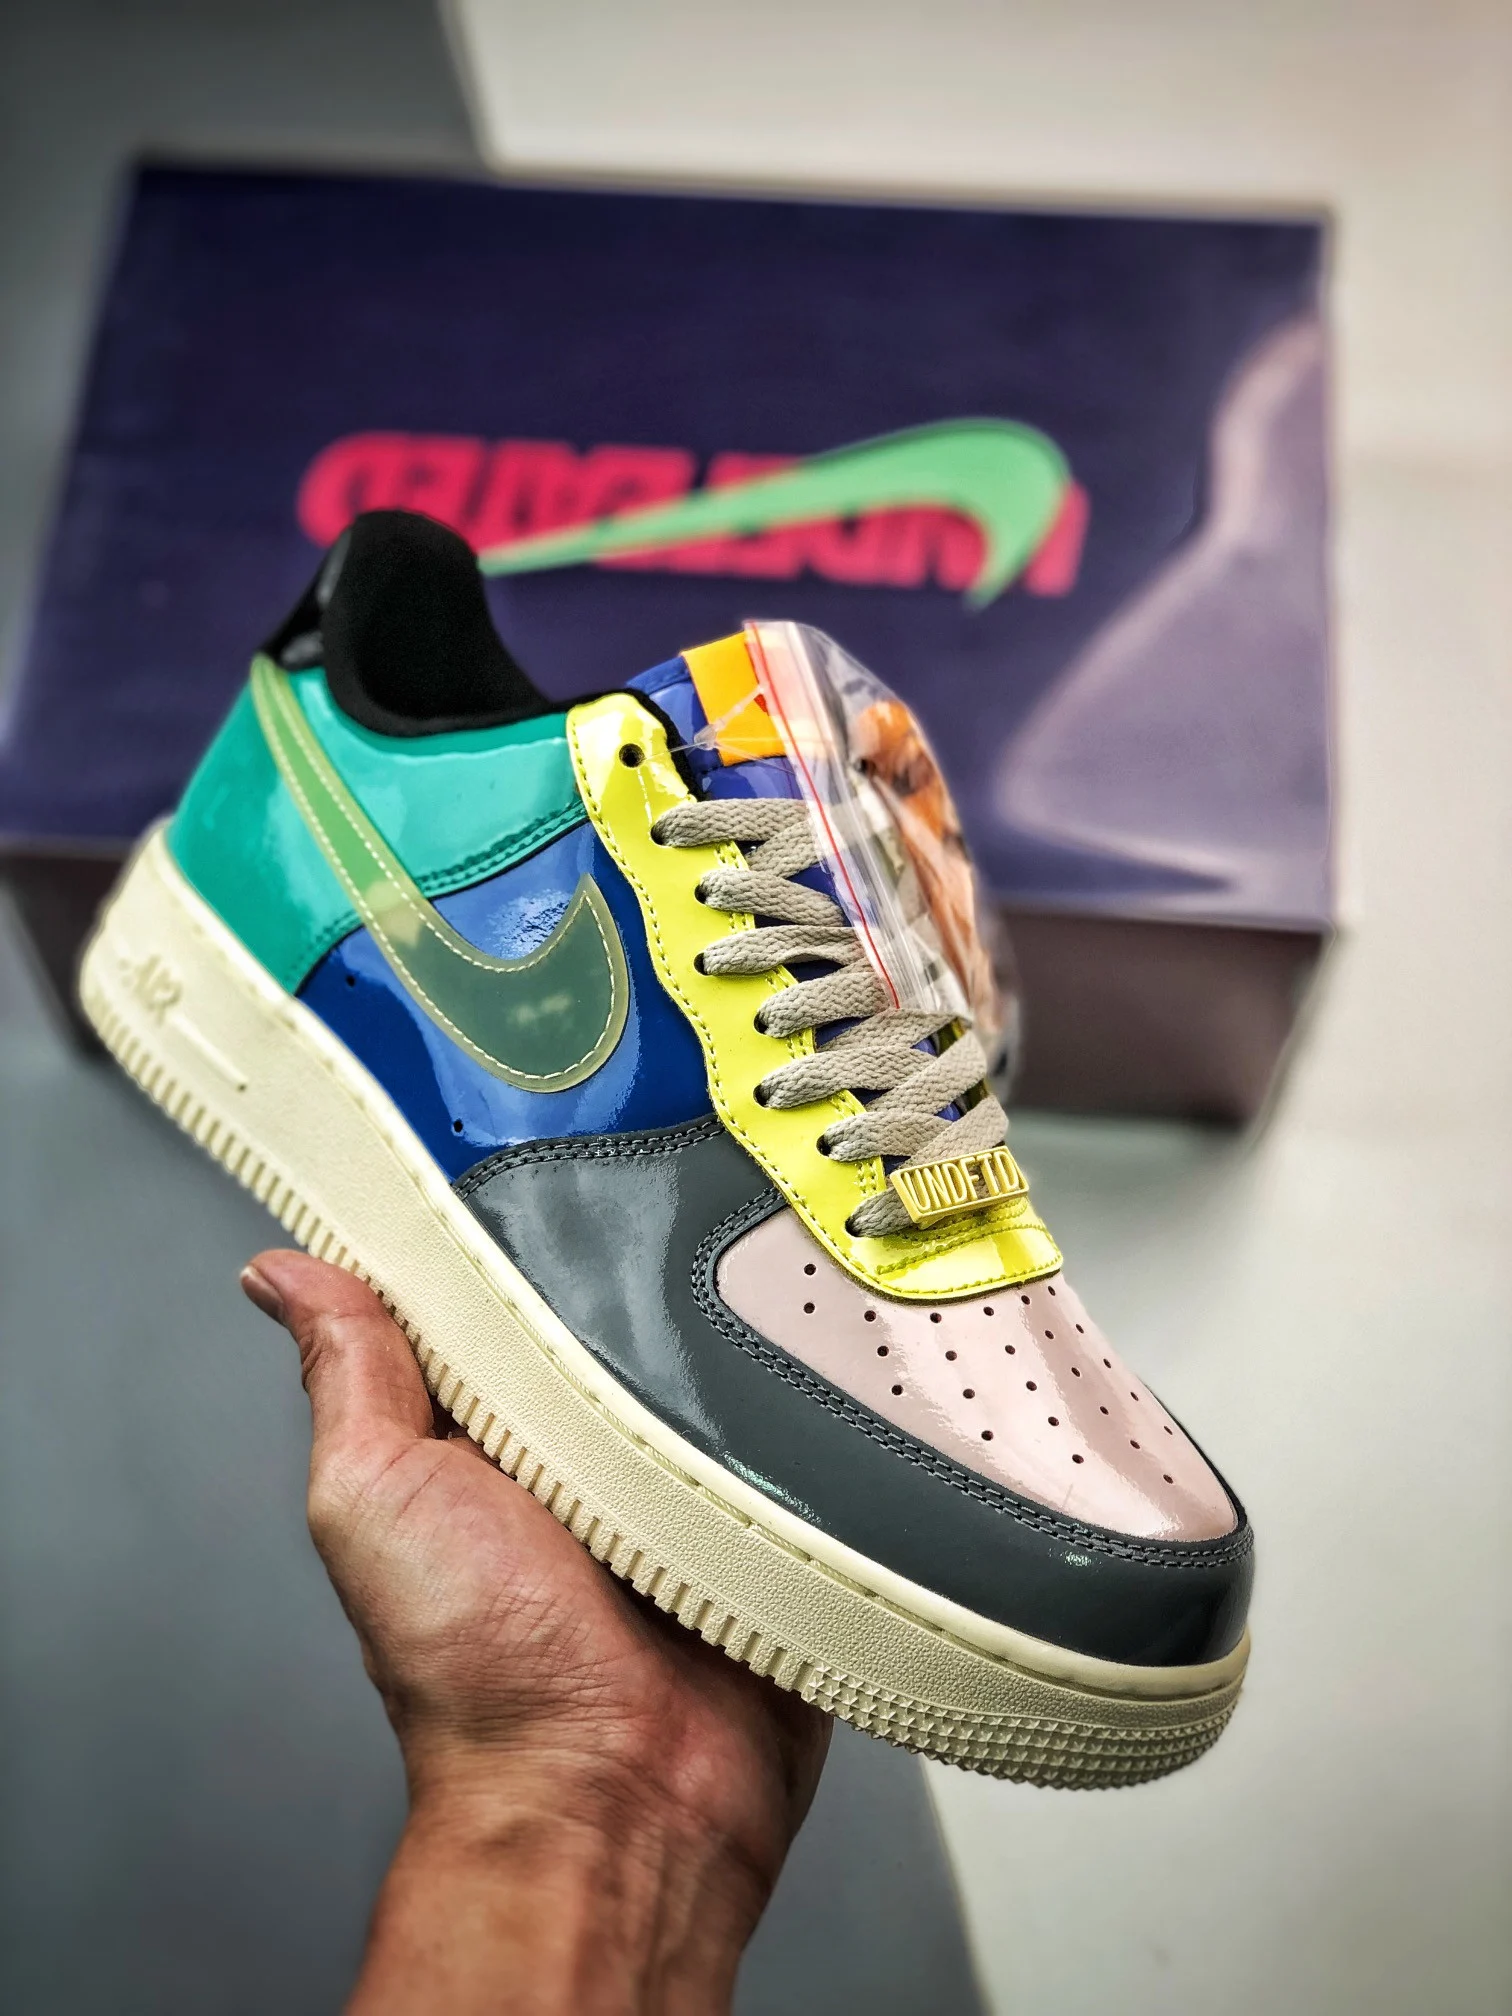 Undefeated x Air Force 1 Low Community Topaz Gold DV5255-001 For Sale